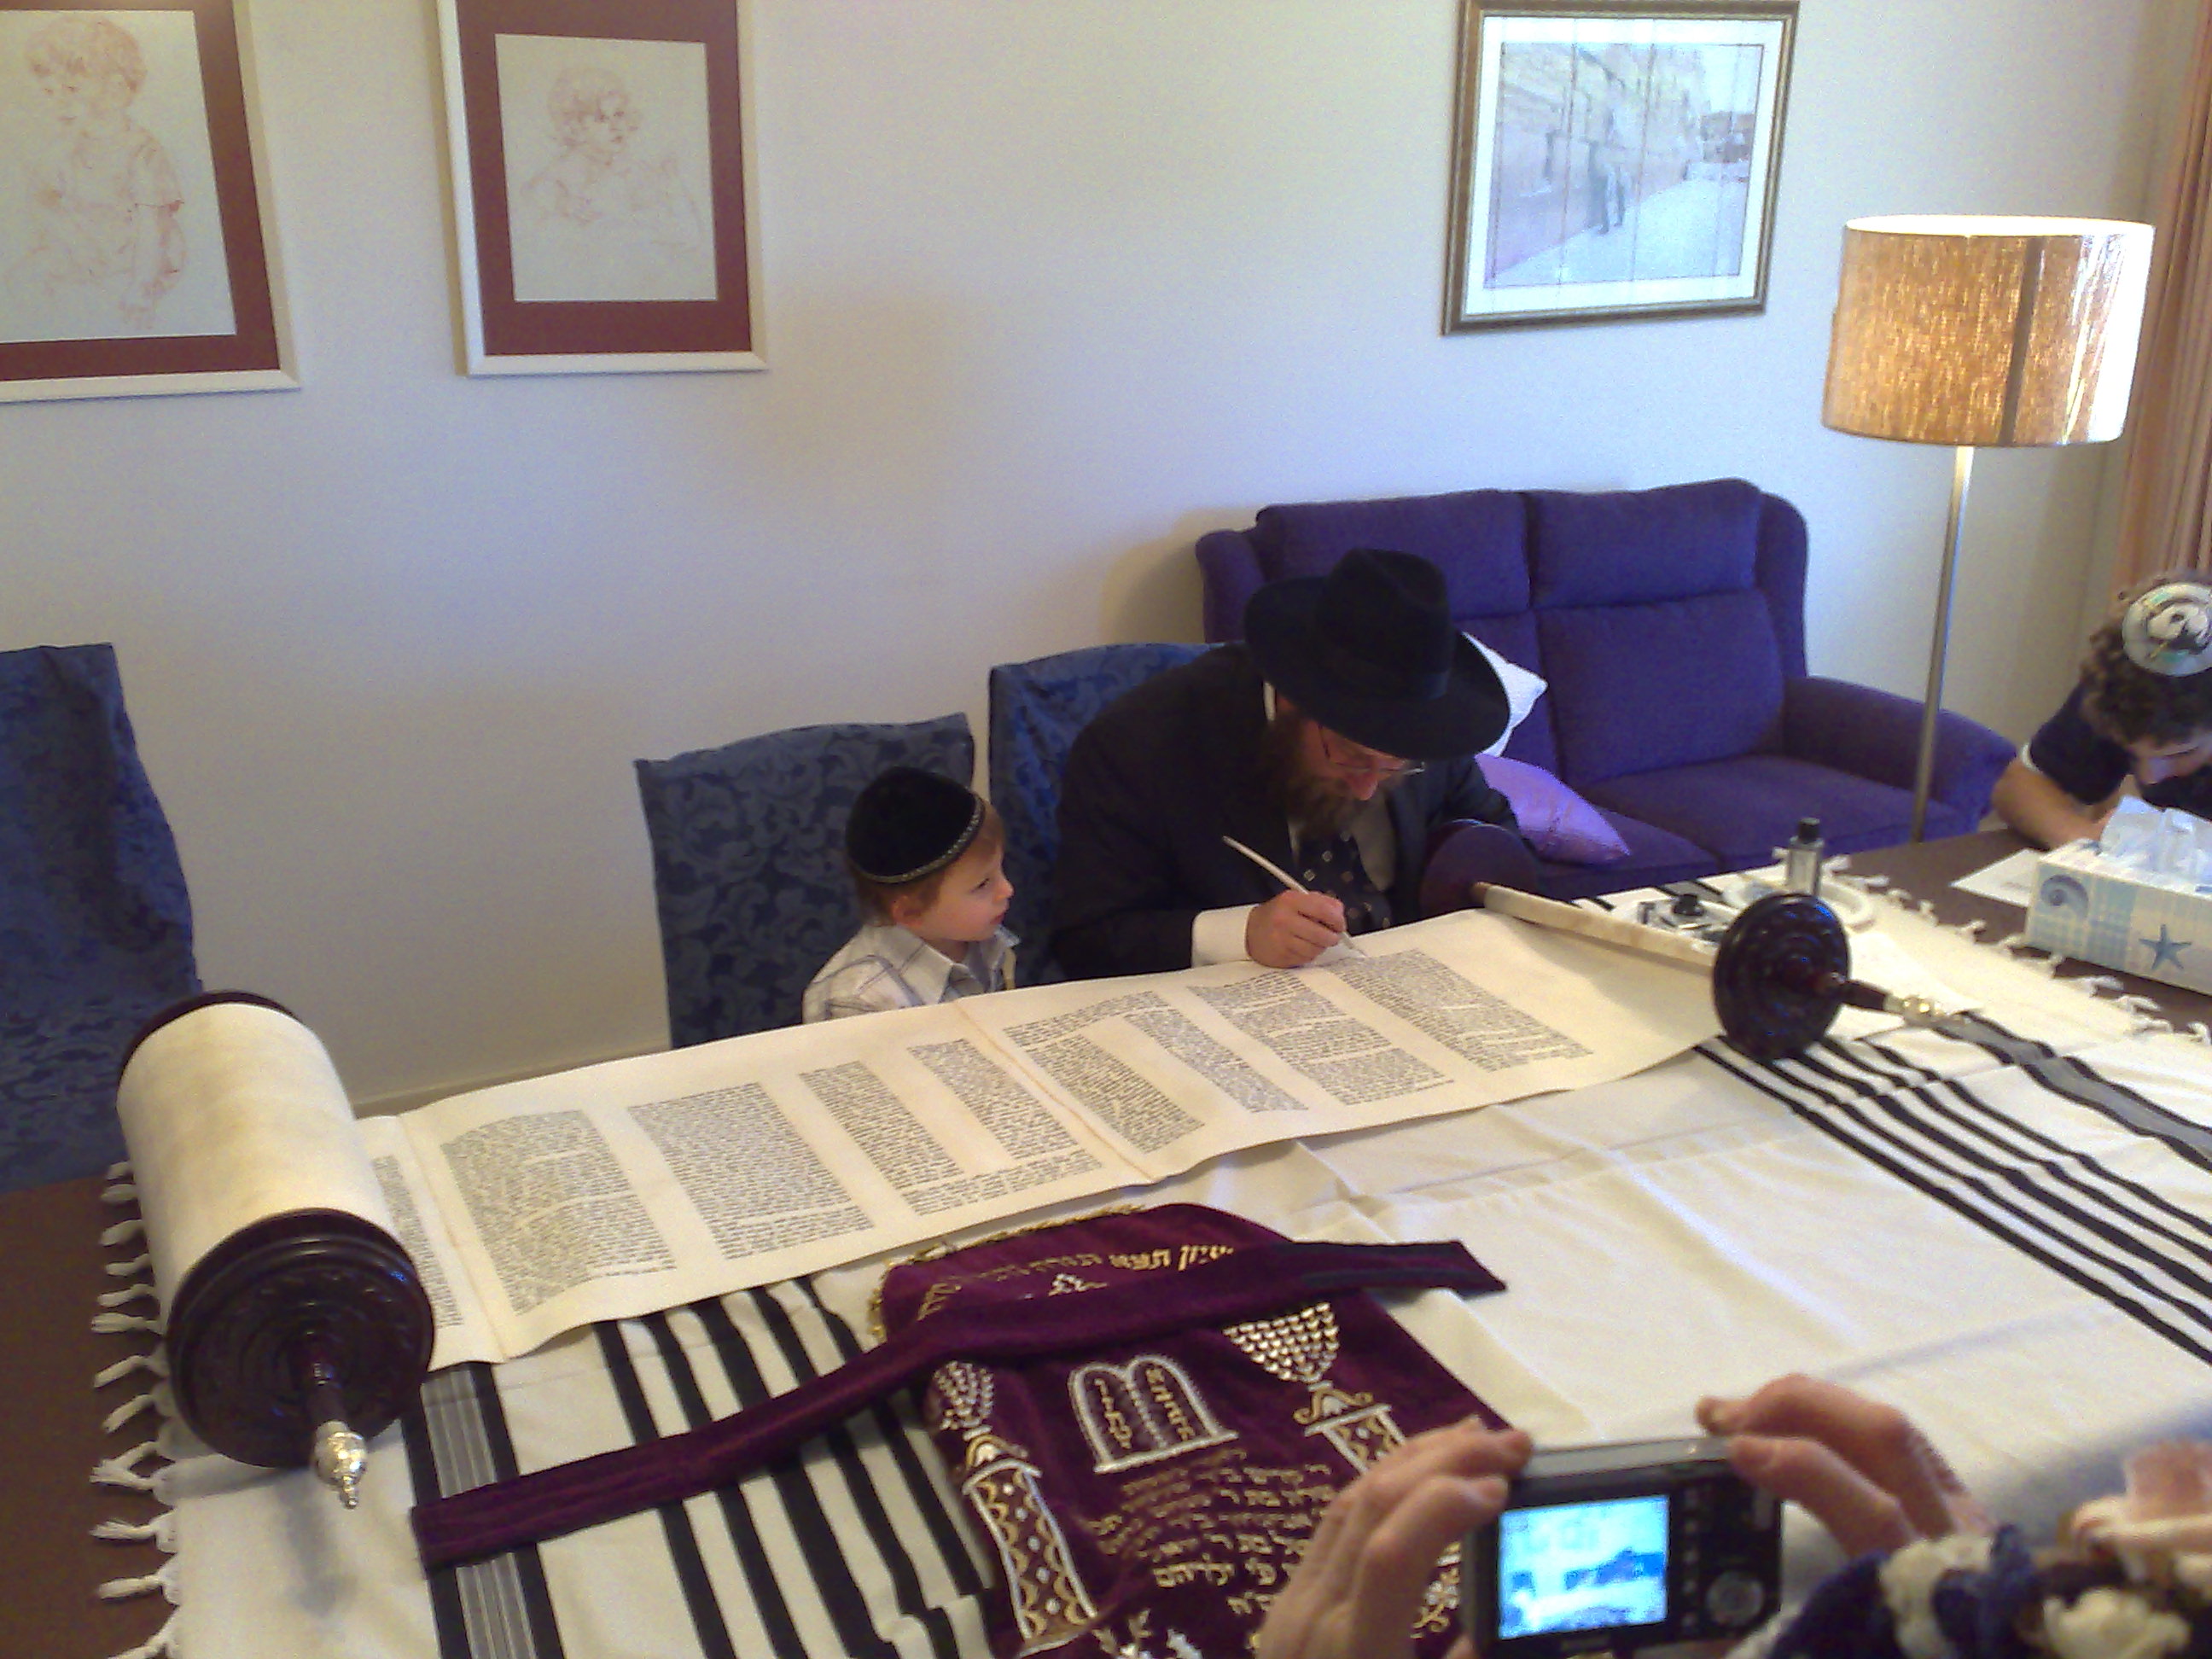 The Torah being completed